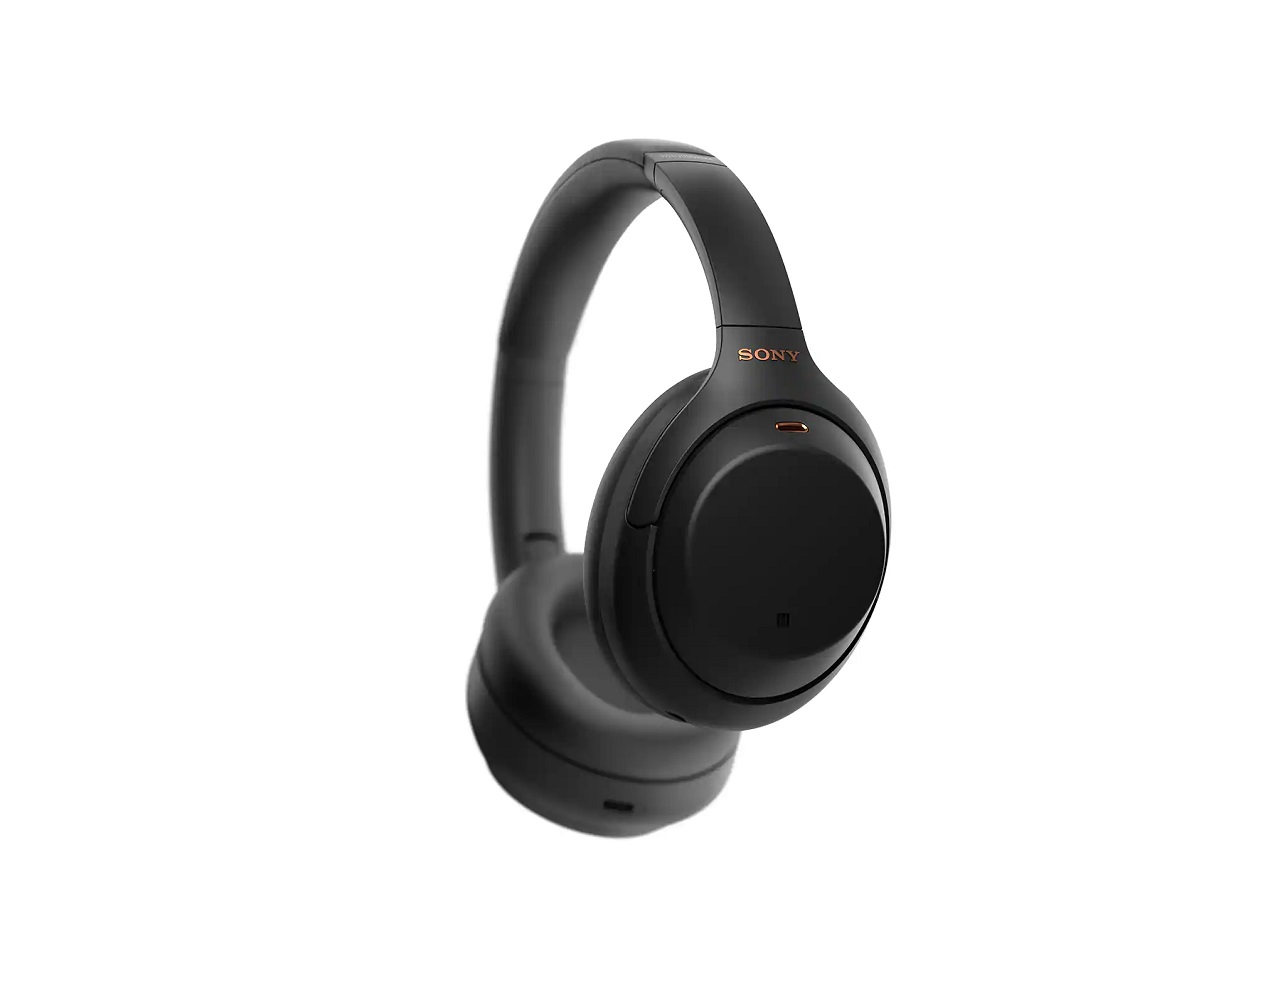 Sony Wh 1000Xm4 1 • Sony Wh-1000Xm4 Wireless Nc Headphones Now Official